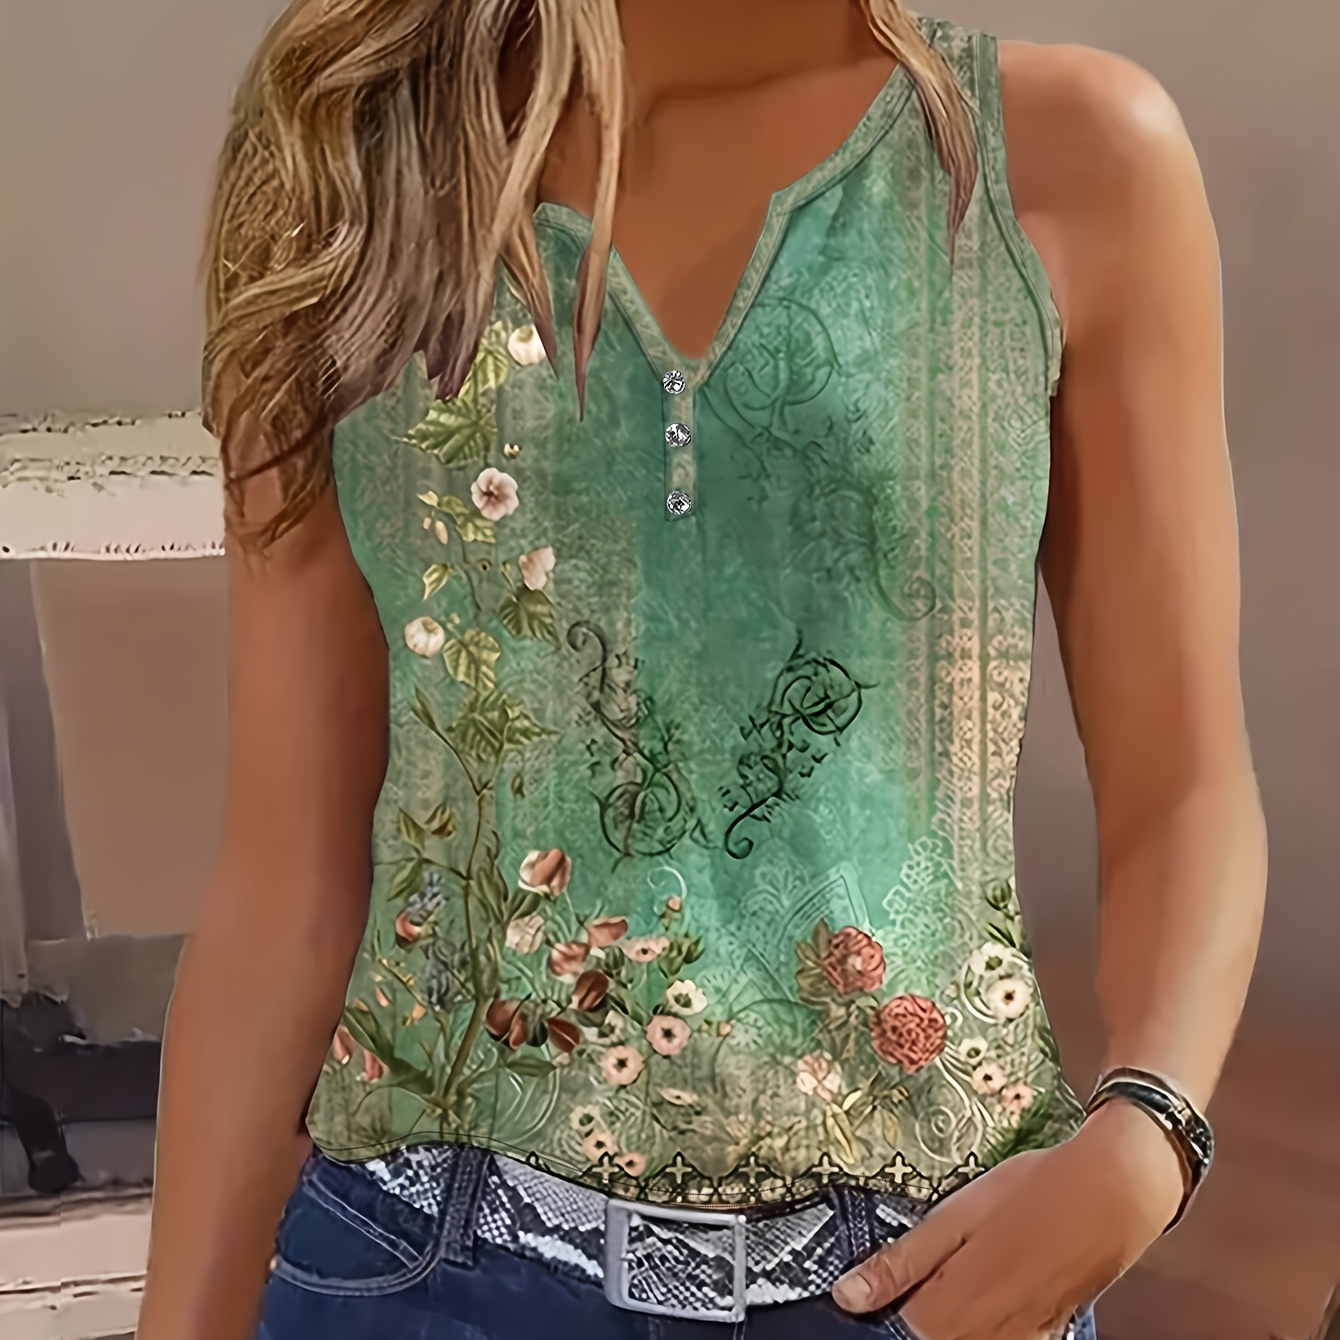 

Floral Print Tank Top, Vintage Summer Notched Neck Sleeveless Top, Women's Clothing